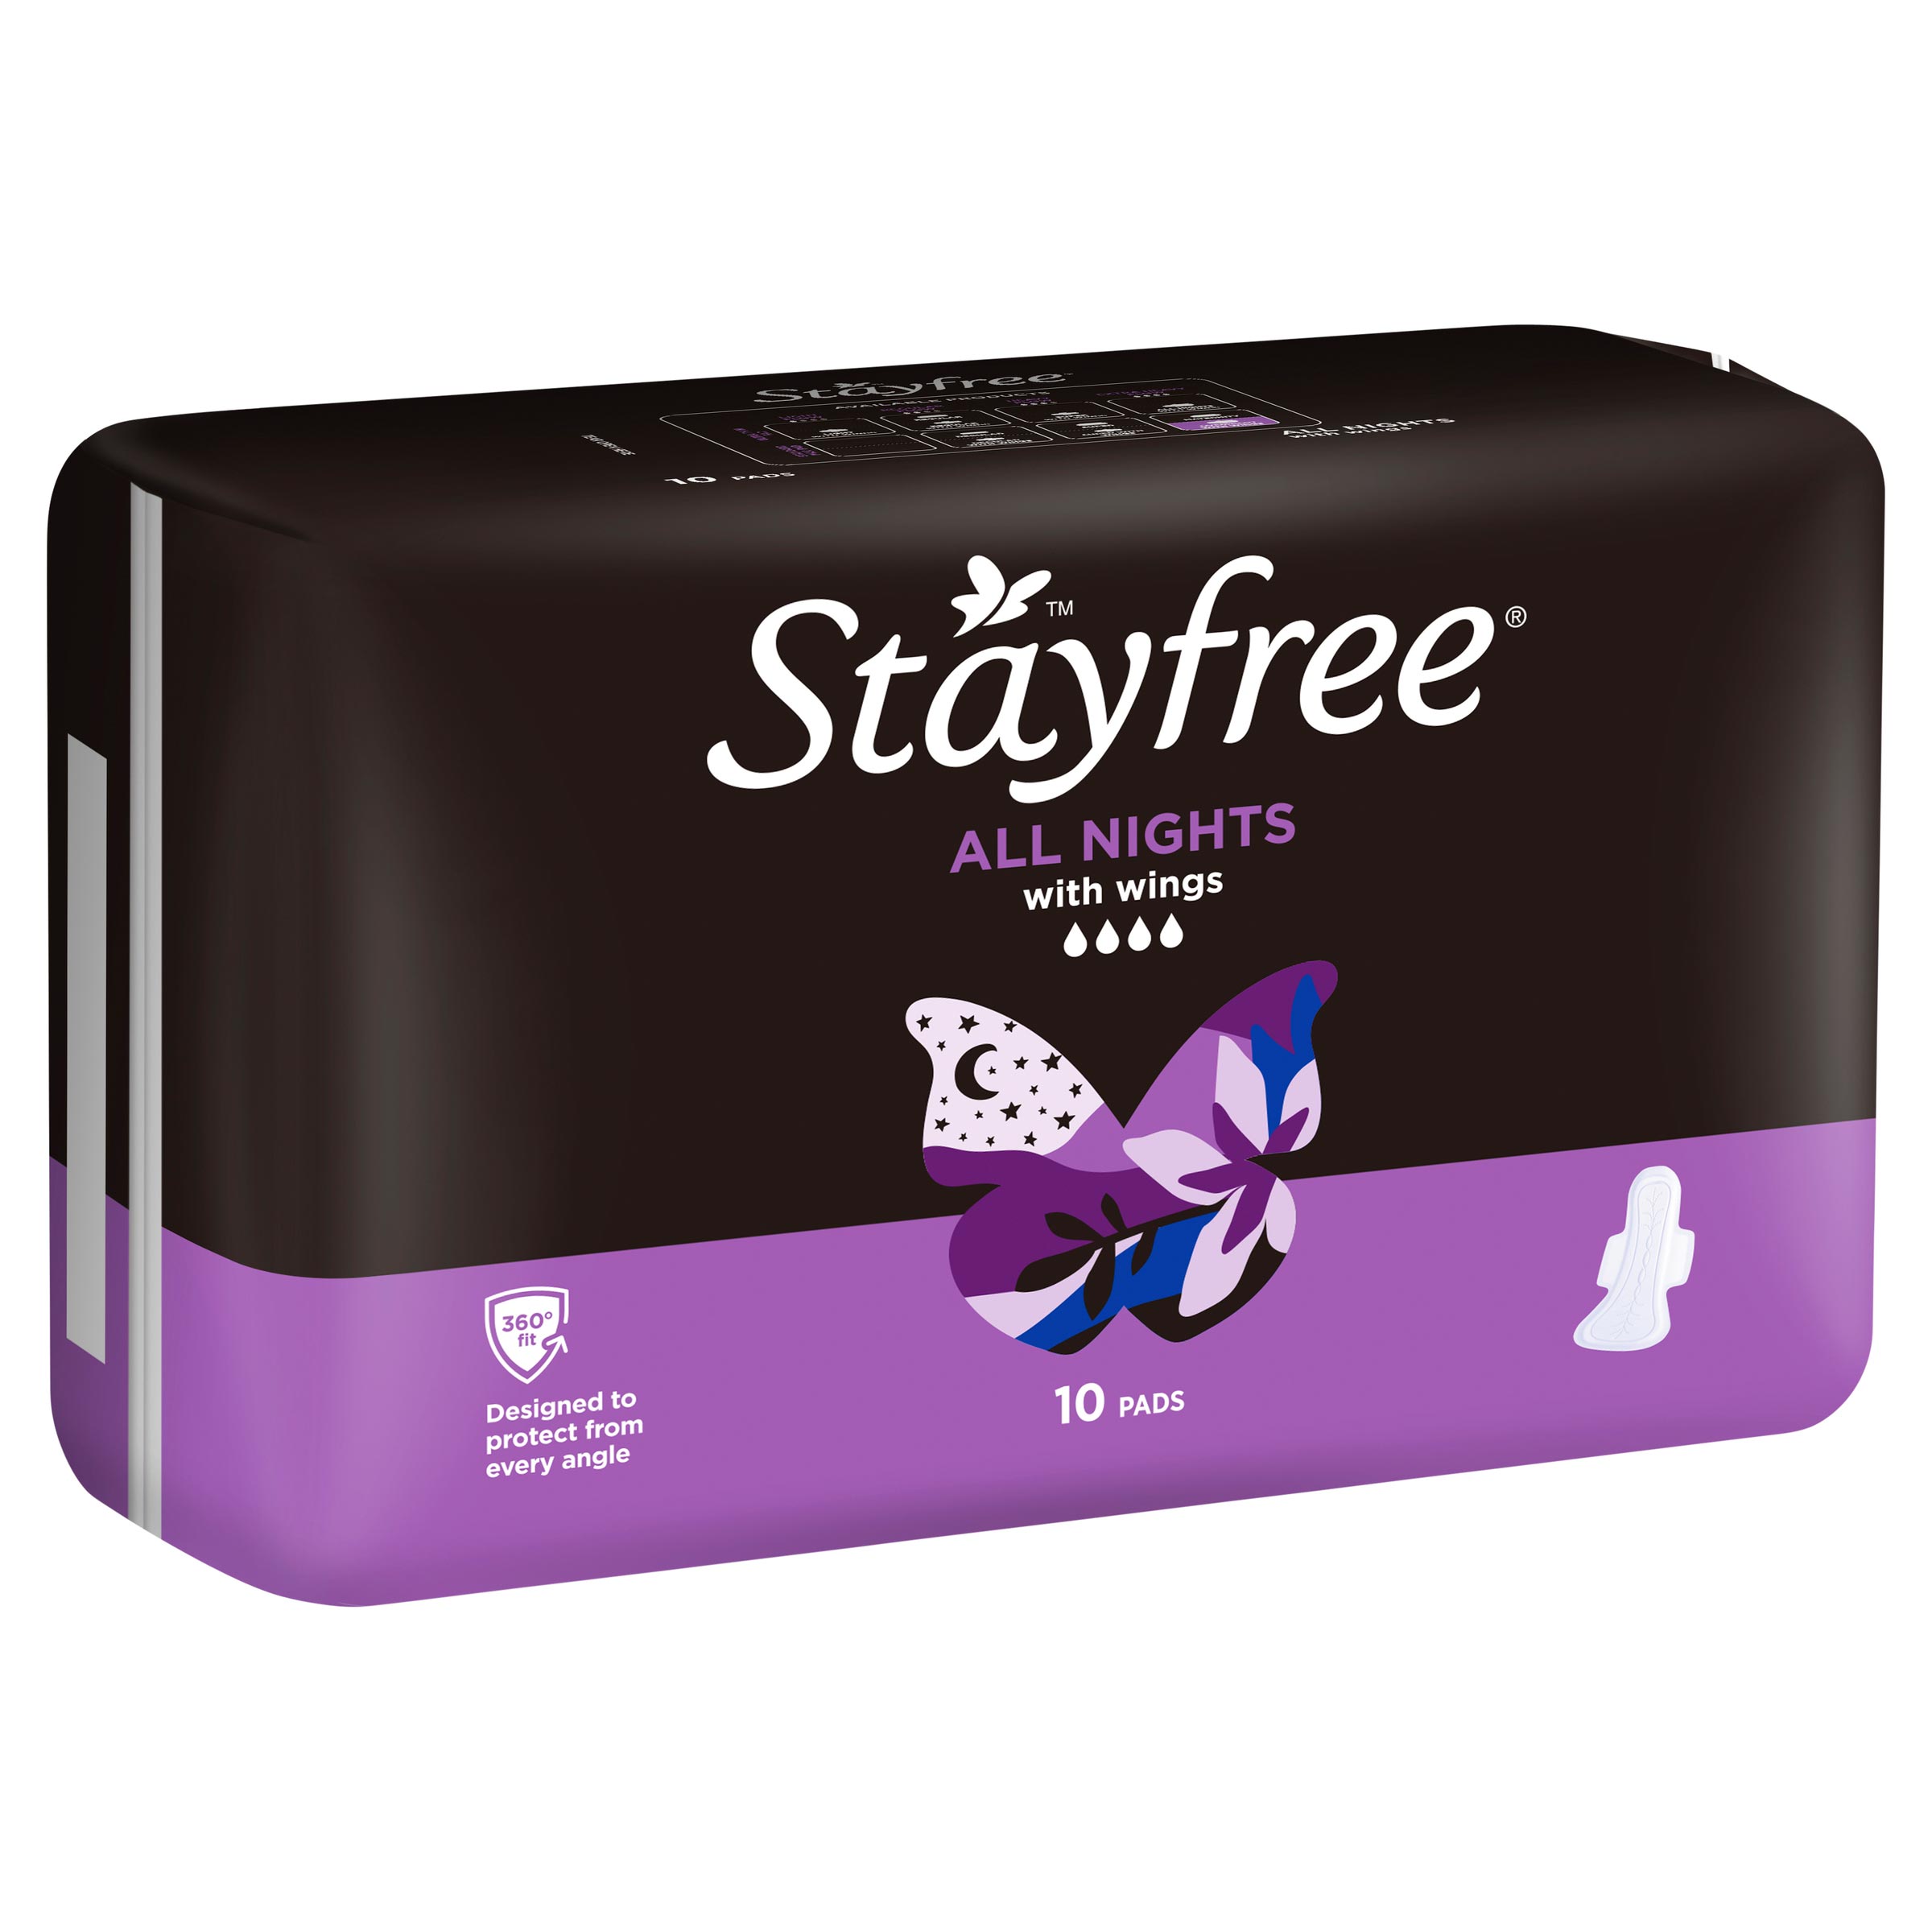 https://www.stayfree.co.nz/sites/stayfree_nz/files/product-images/stayfree-all-night-wings-11.jpg